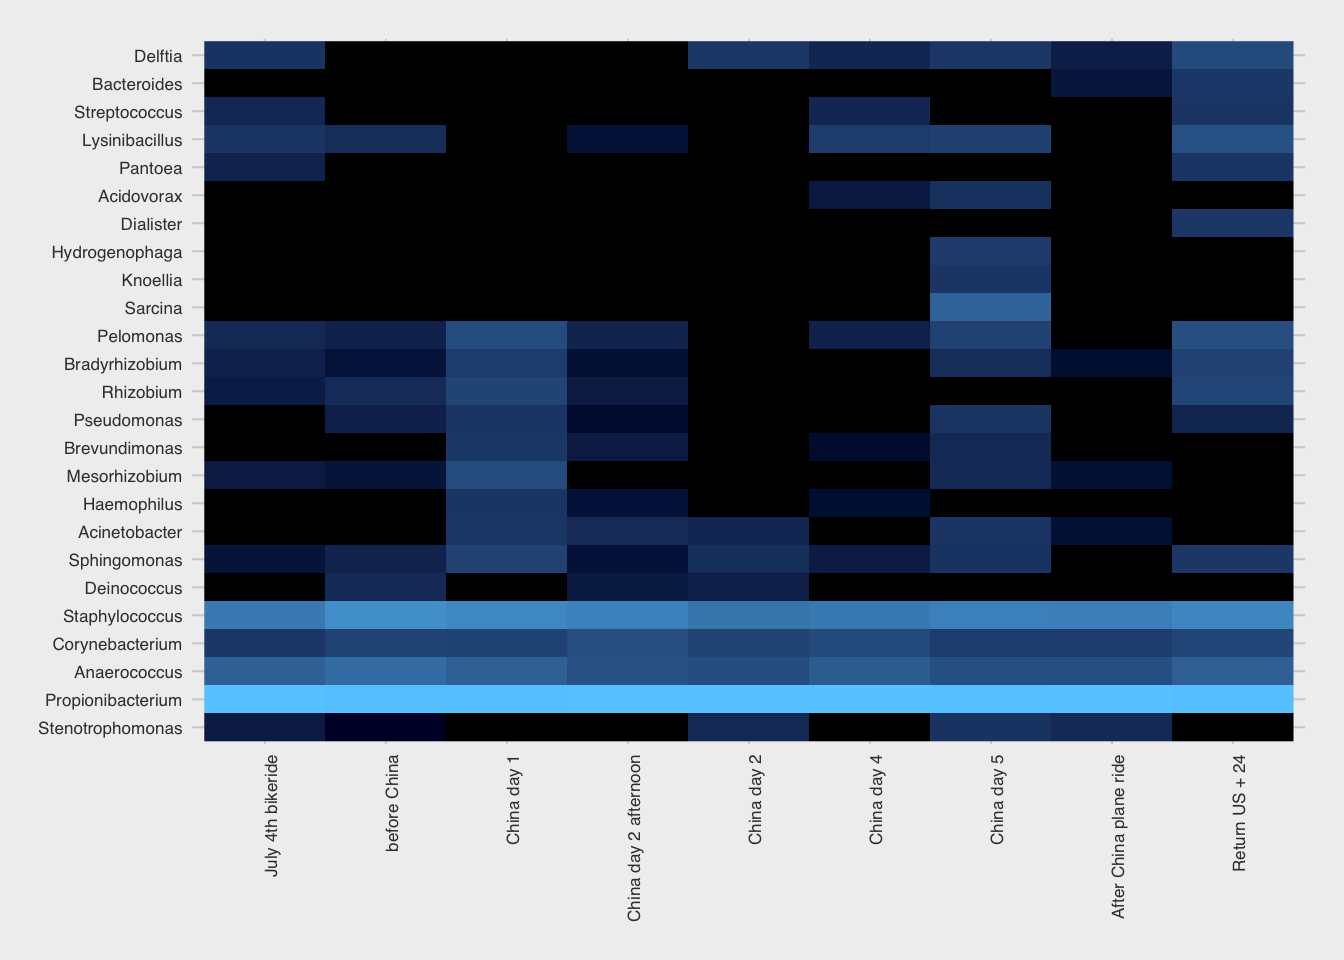 Heat map of my skin microbiome before and after a trip to China.